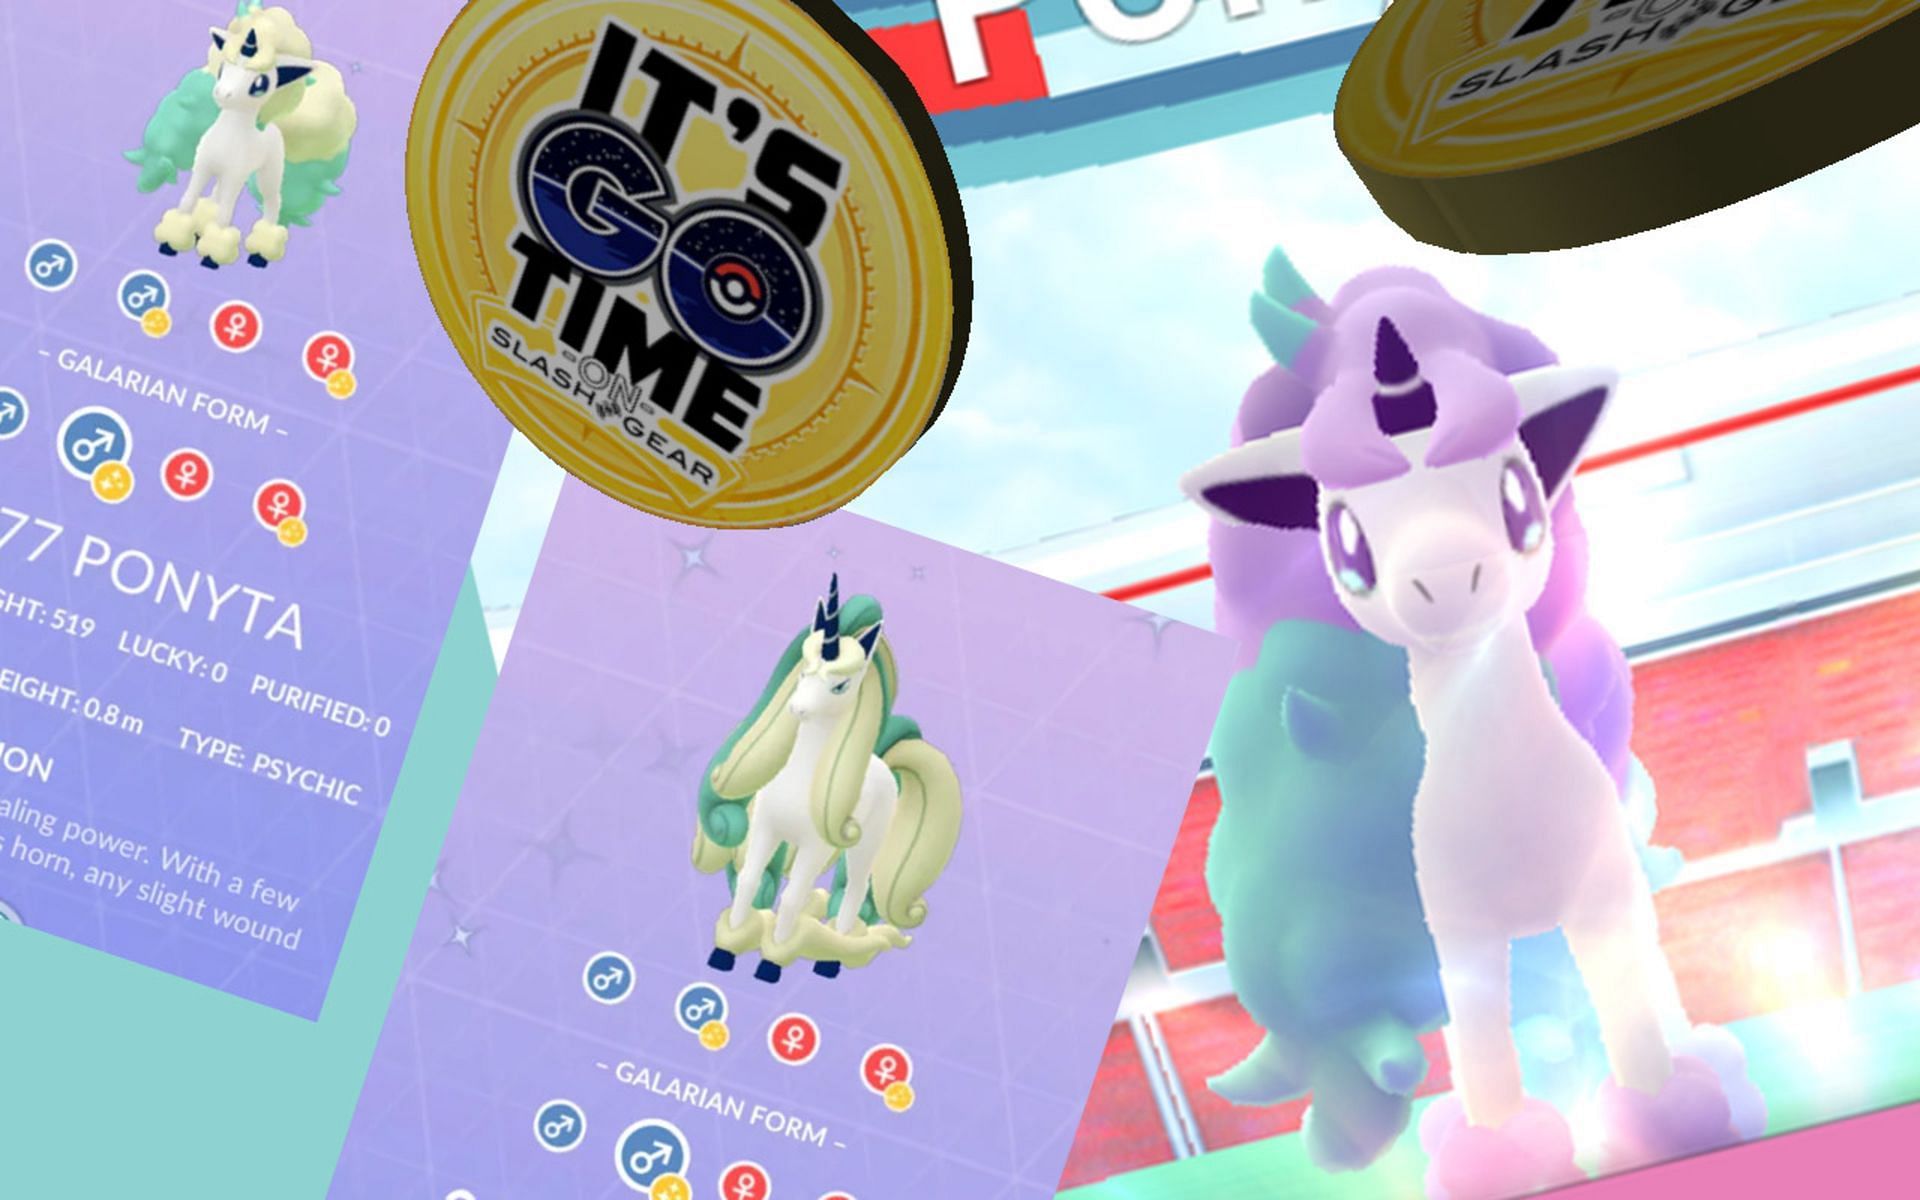 Shiny Pokemon can be tough to keep track of in Pokemon GO, but fortunately the community has rose to address the issue (Image via Niantic).